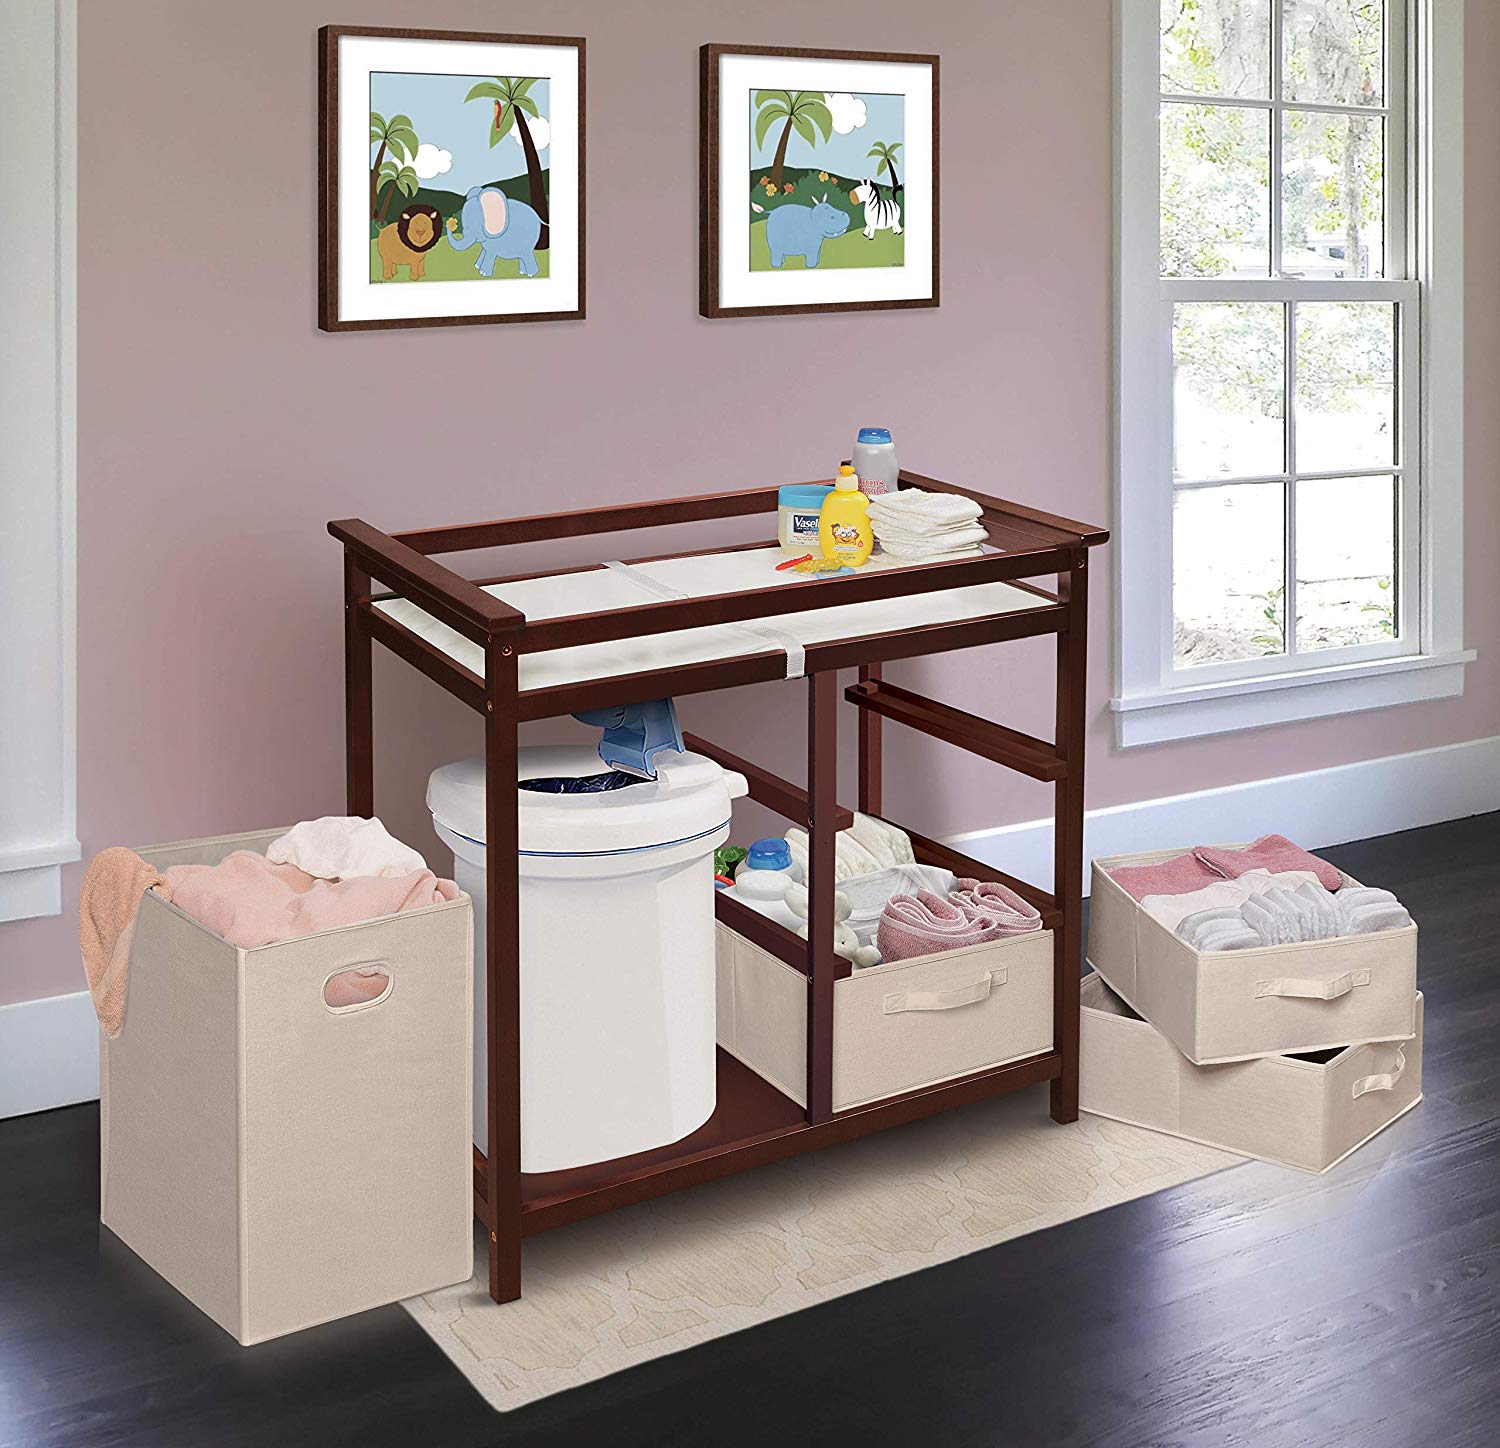 Badger Basket Modern Changing Table with Three Baskets & Hamper-Finish:Cherry - image 6 of 7